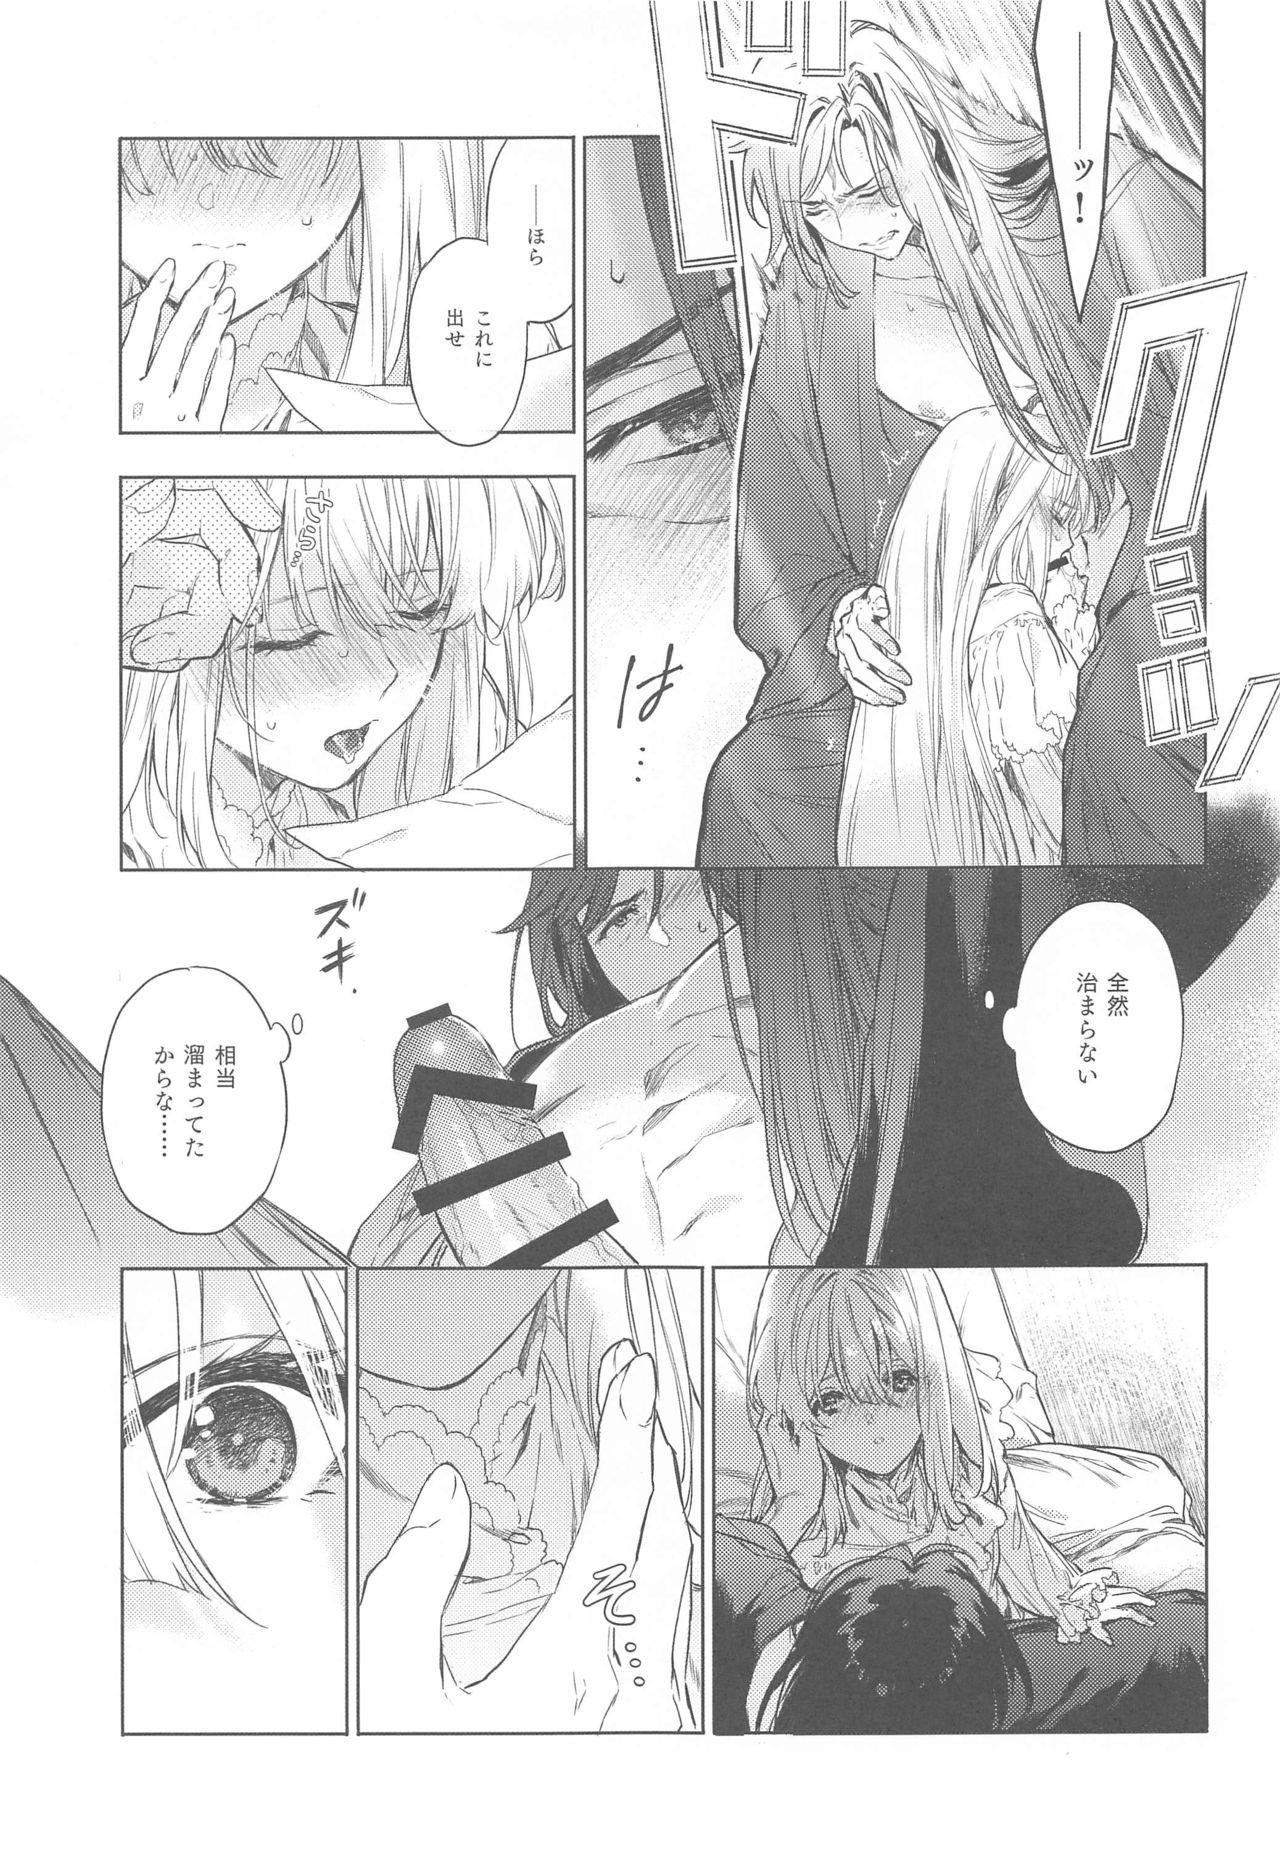 Tits Scars of love - Violet evergarden Jav - Page 8